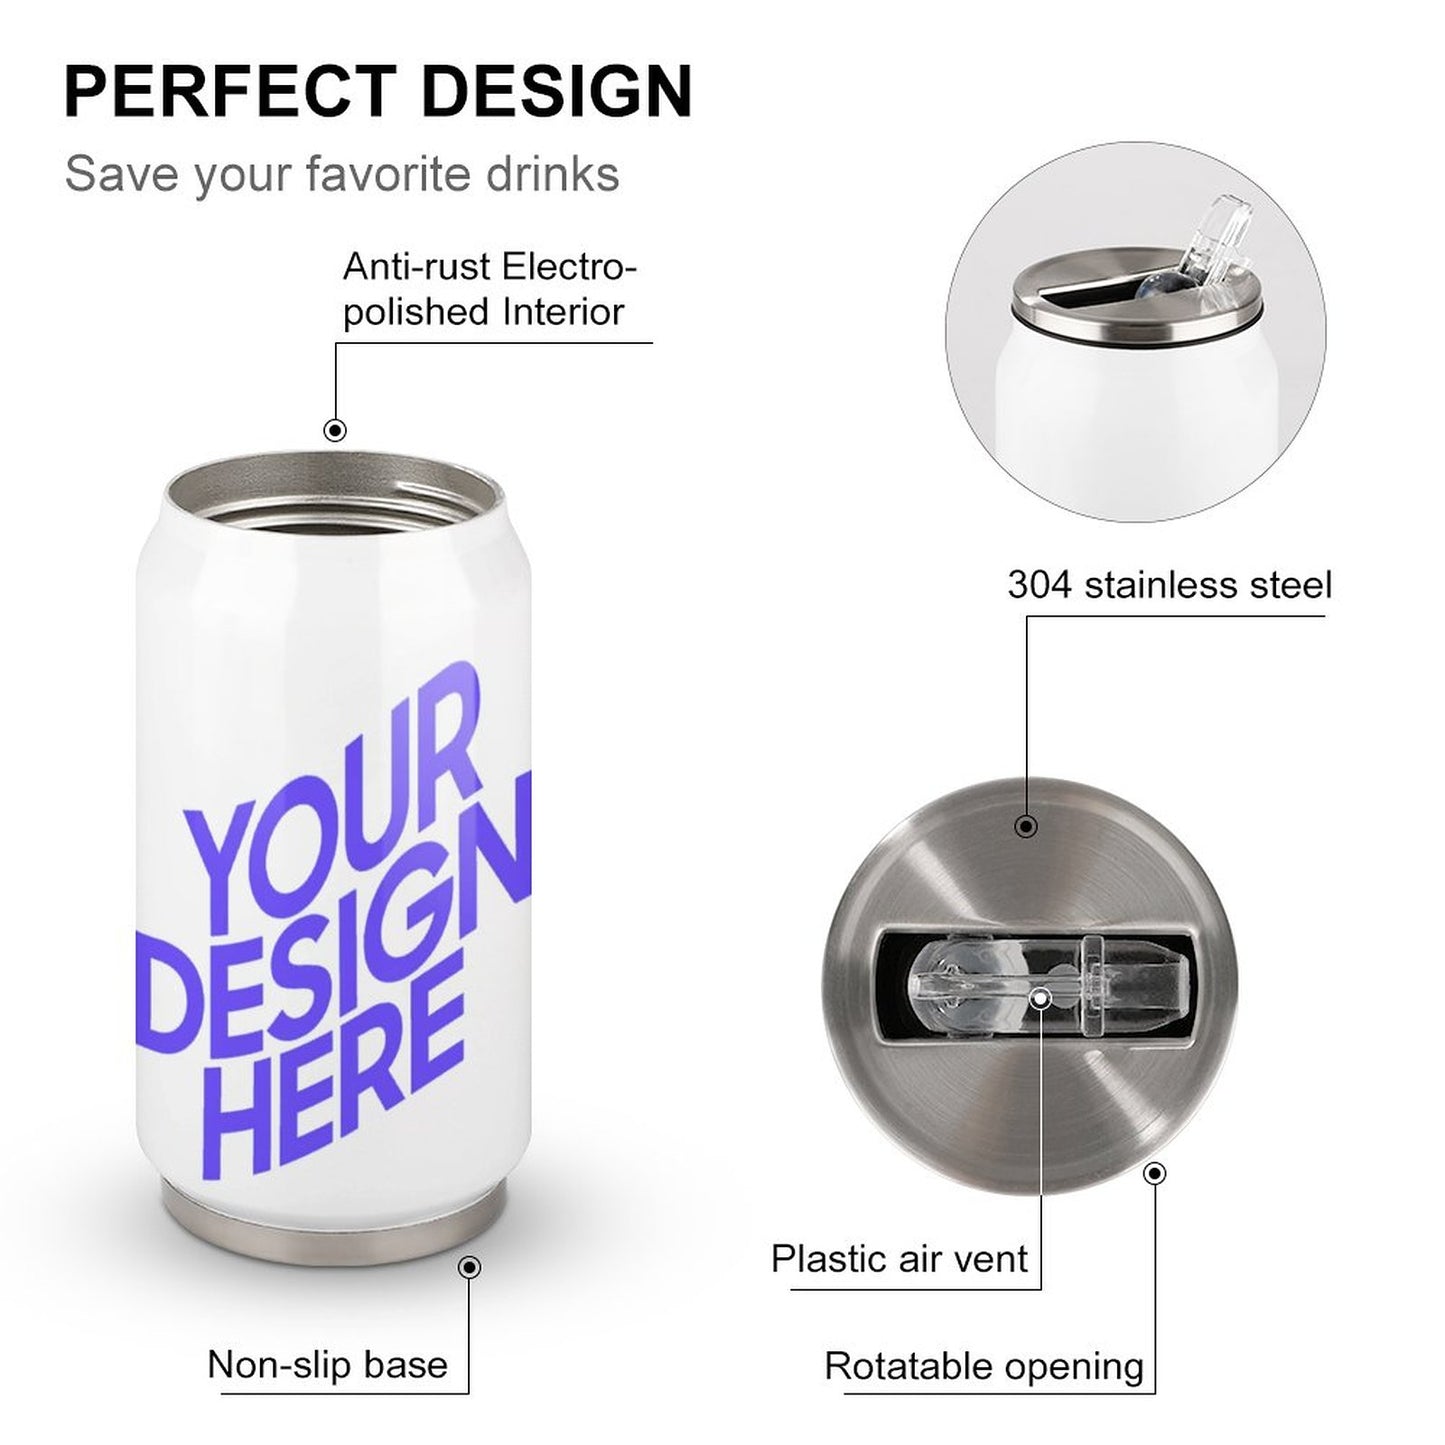 Custom Personalised 300ml / 500ml Photo Cola Cup Thermo Mug 304 Stainless Steel With Lid And Straw (Made in USA, Free Fast Shipping)